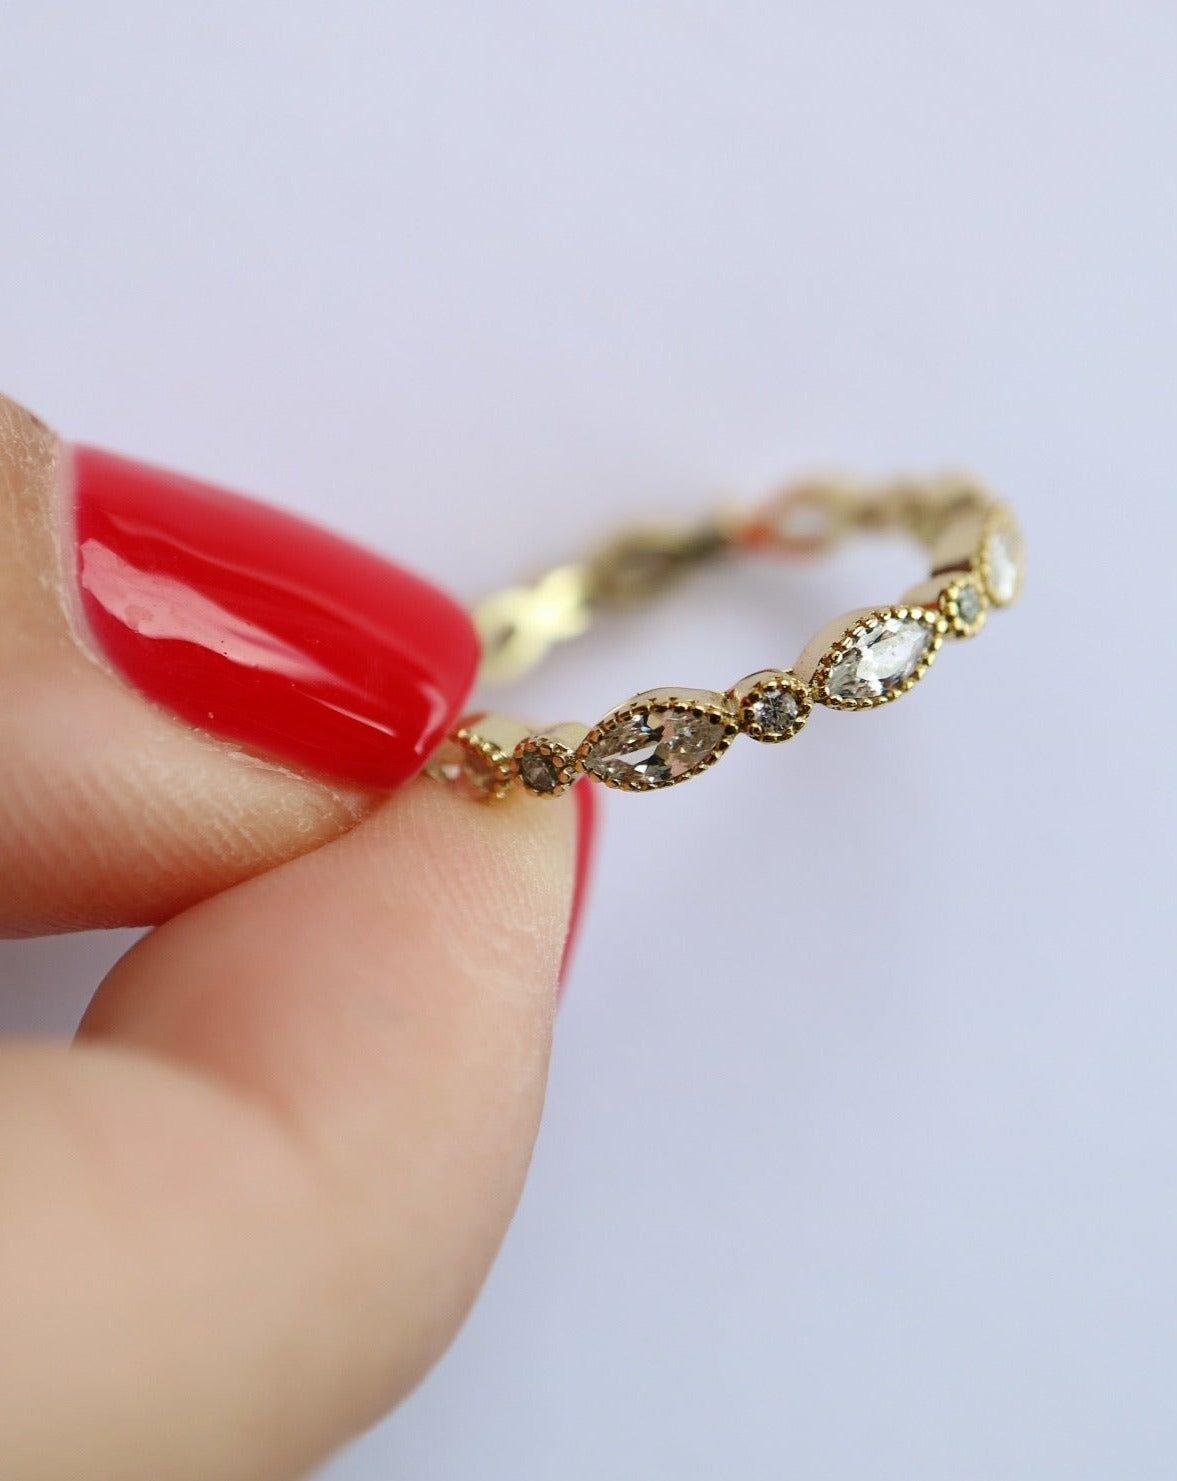 Gold ring in female hand with red nails